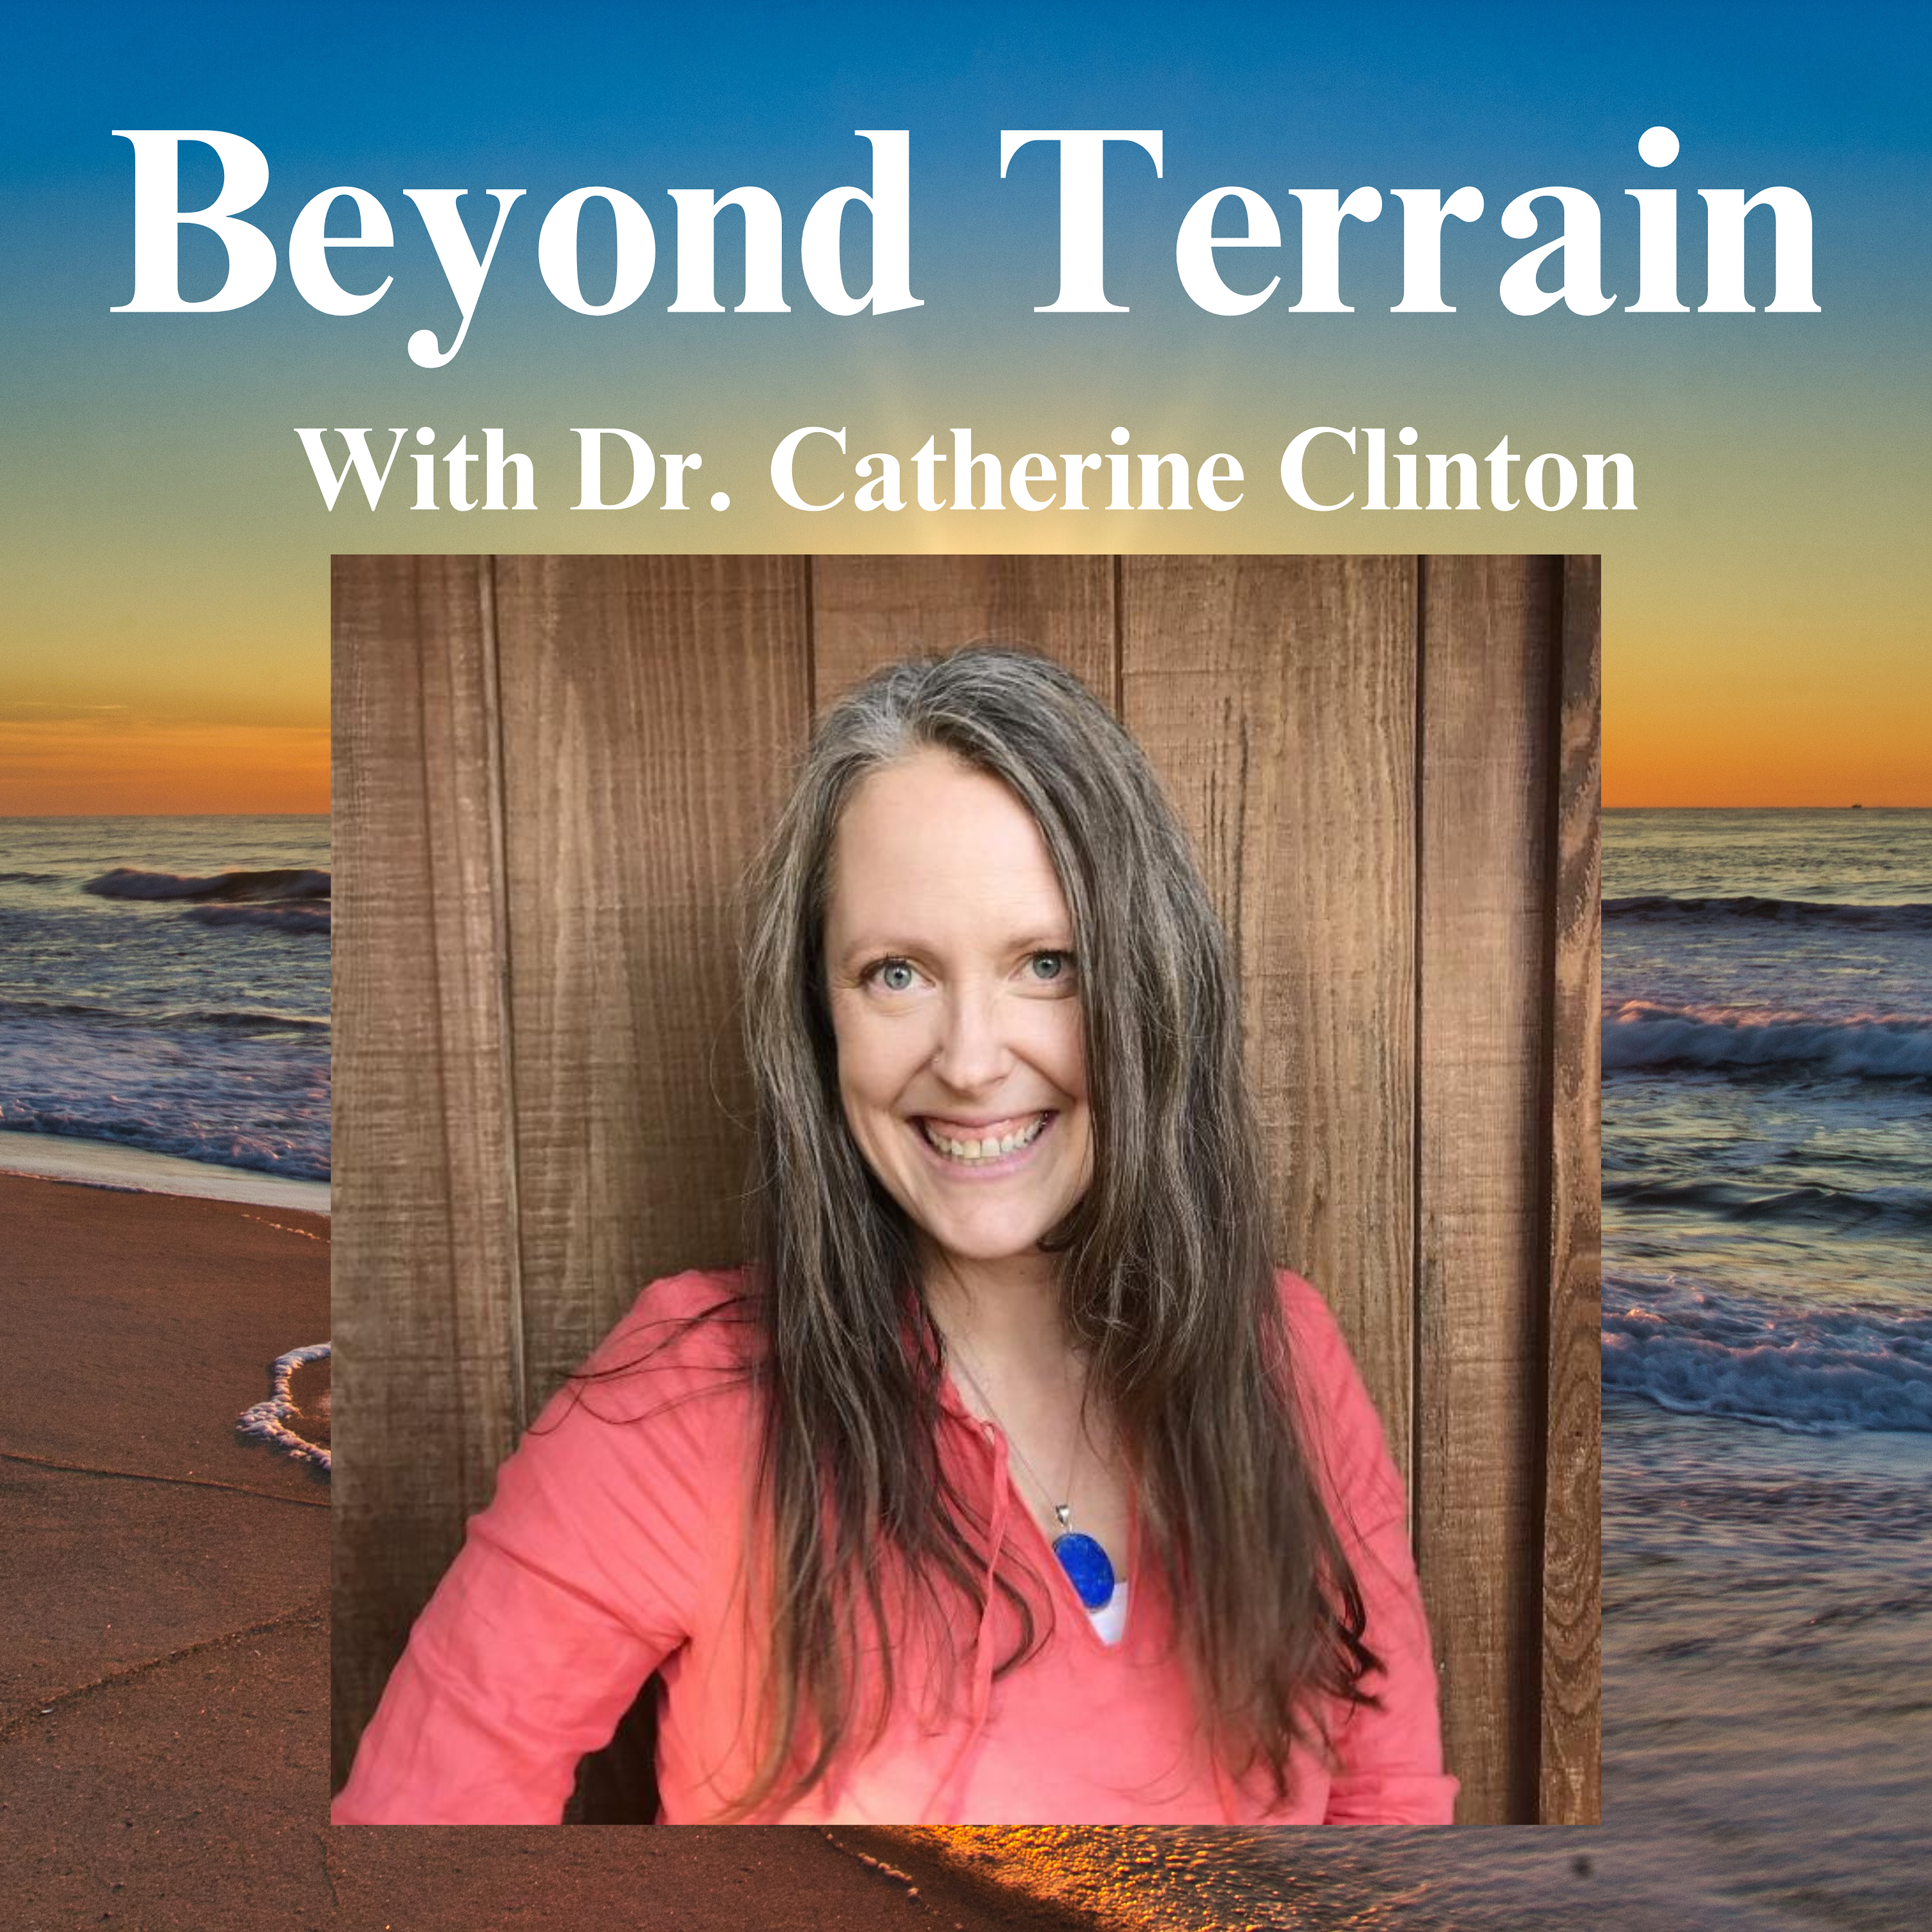 Dr. Catherine Clinton discusses the Quantum Terrain, Materialism, Energetic Body, Fascia, Movement, and more!